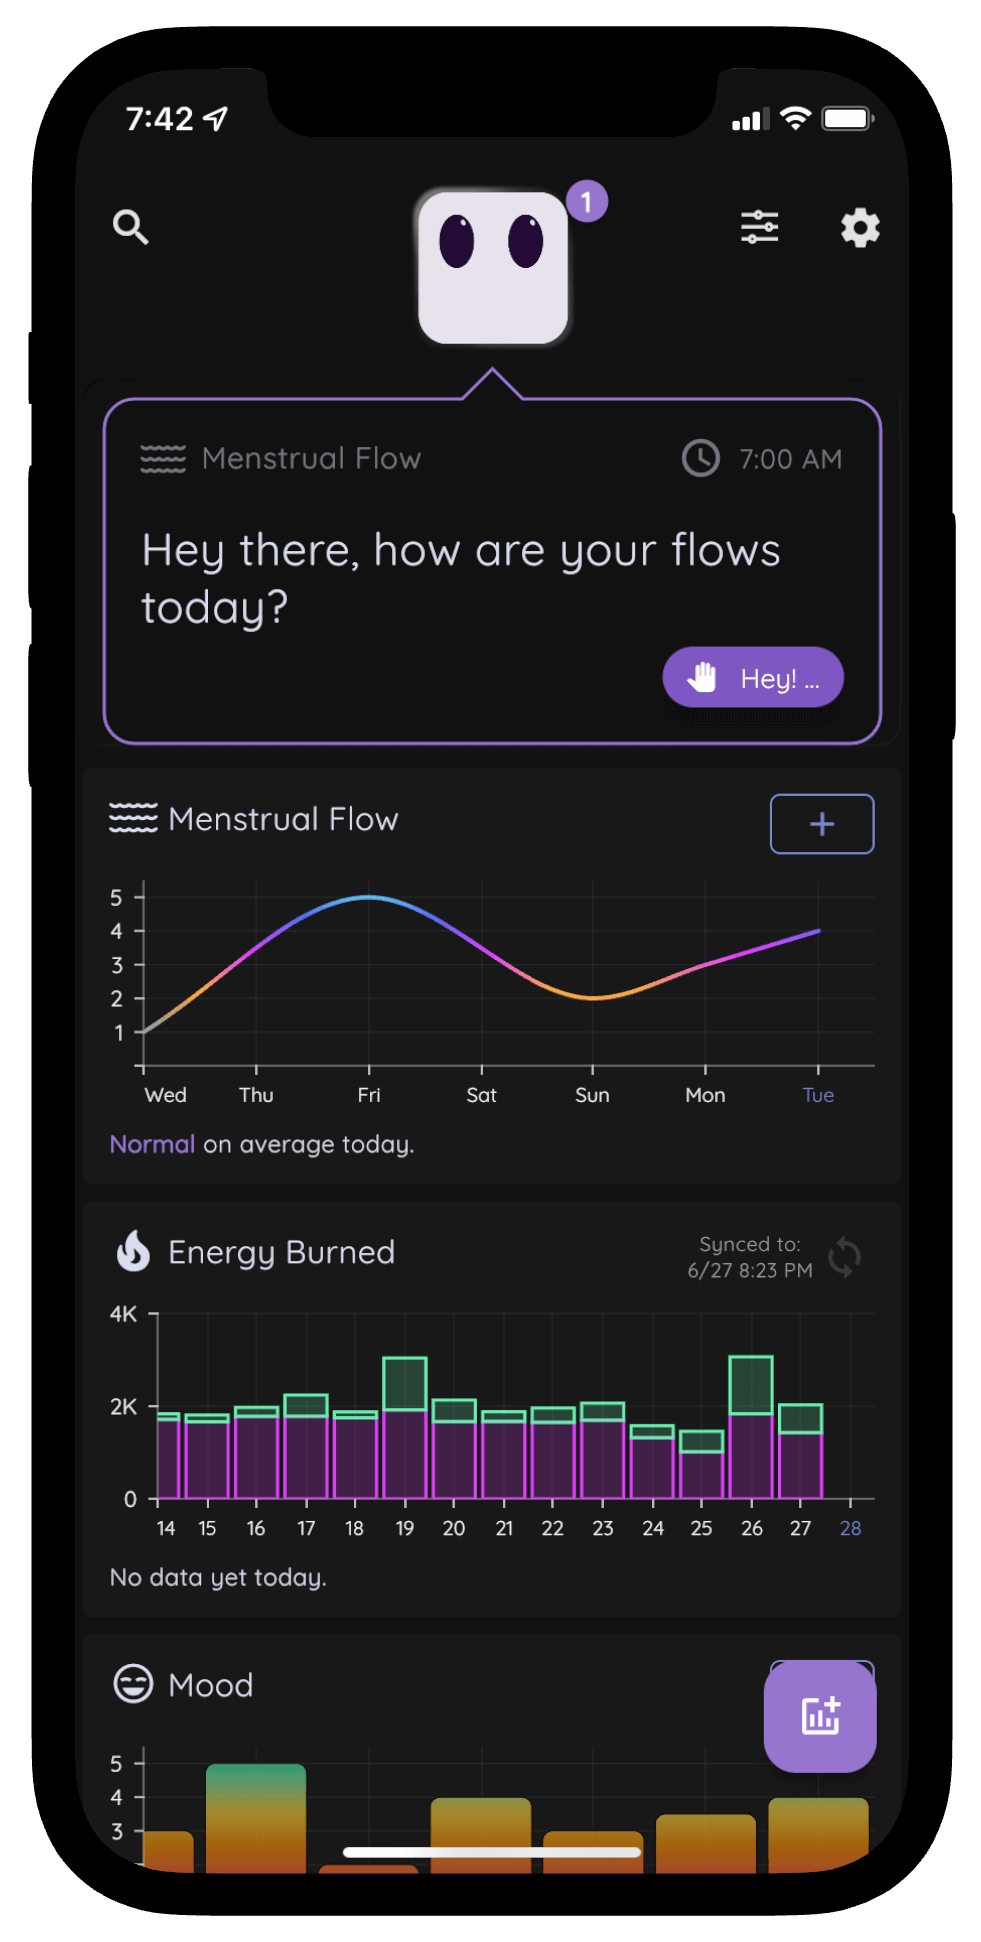 Period tracker app dashboard with menstrual flow tracker, energy burned, and mood chart